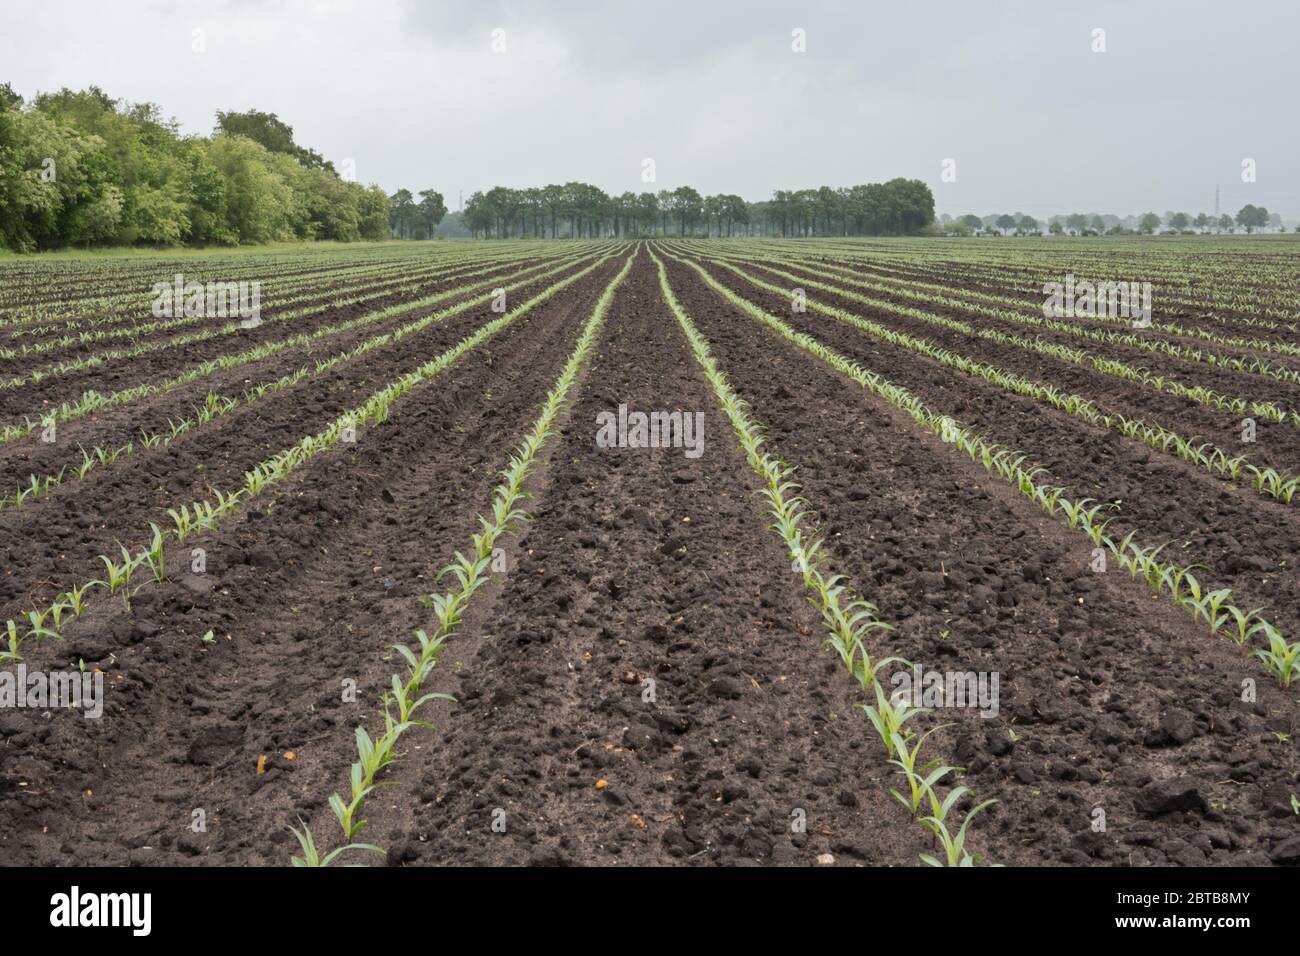 Long rows of young maize plants on a field towards the horizon Stock Photo